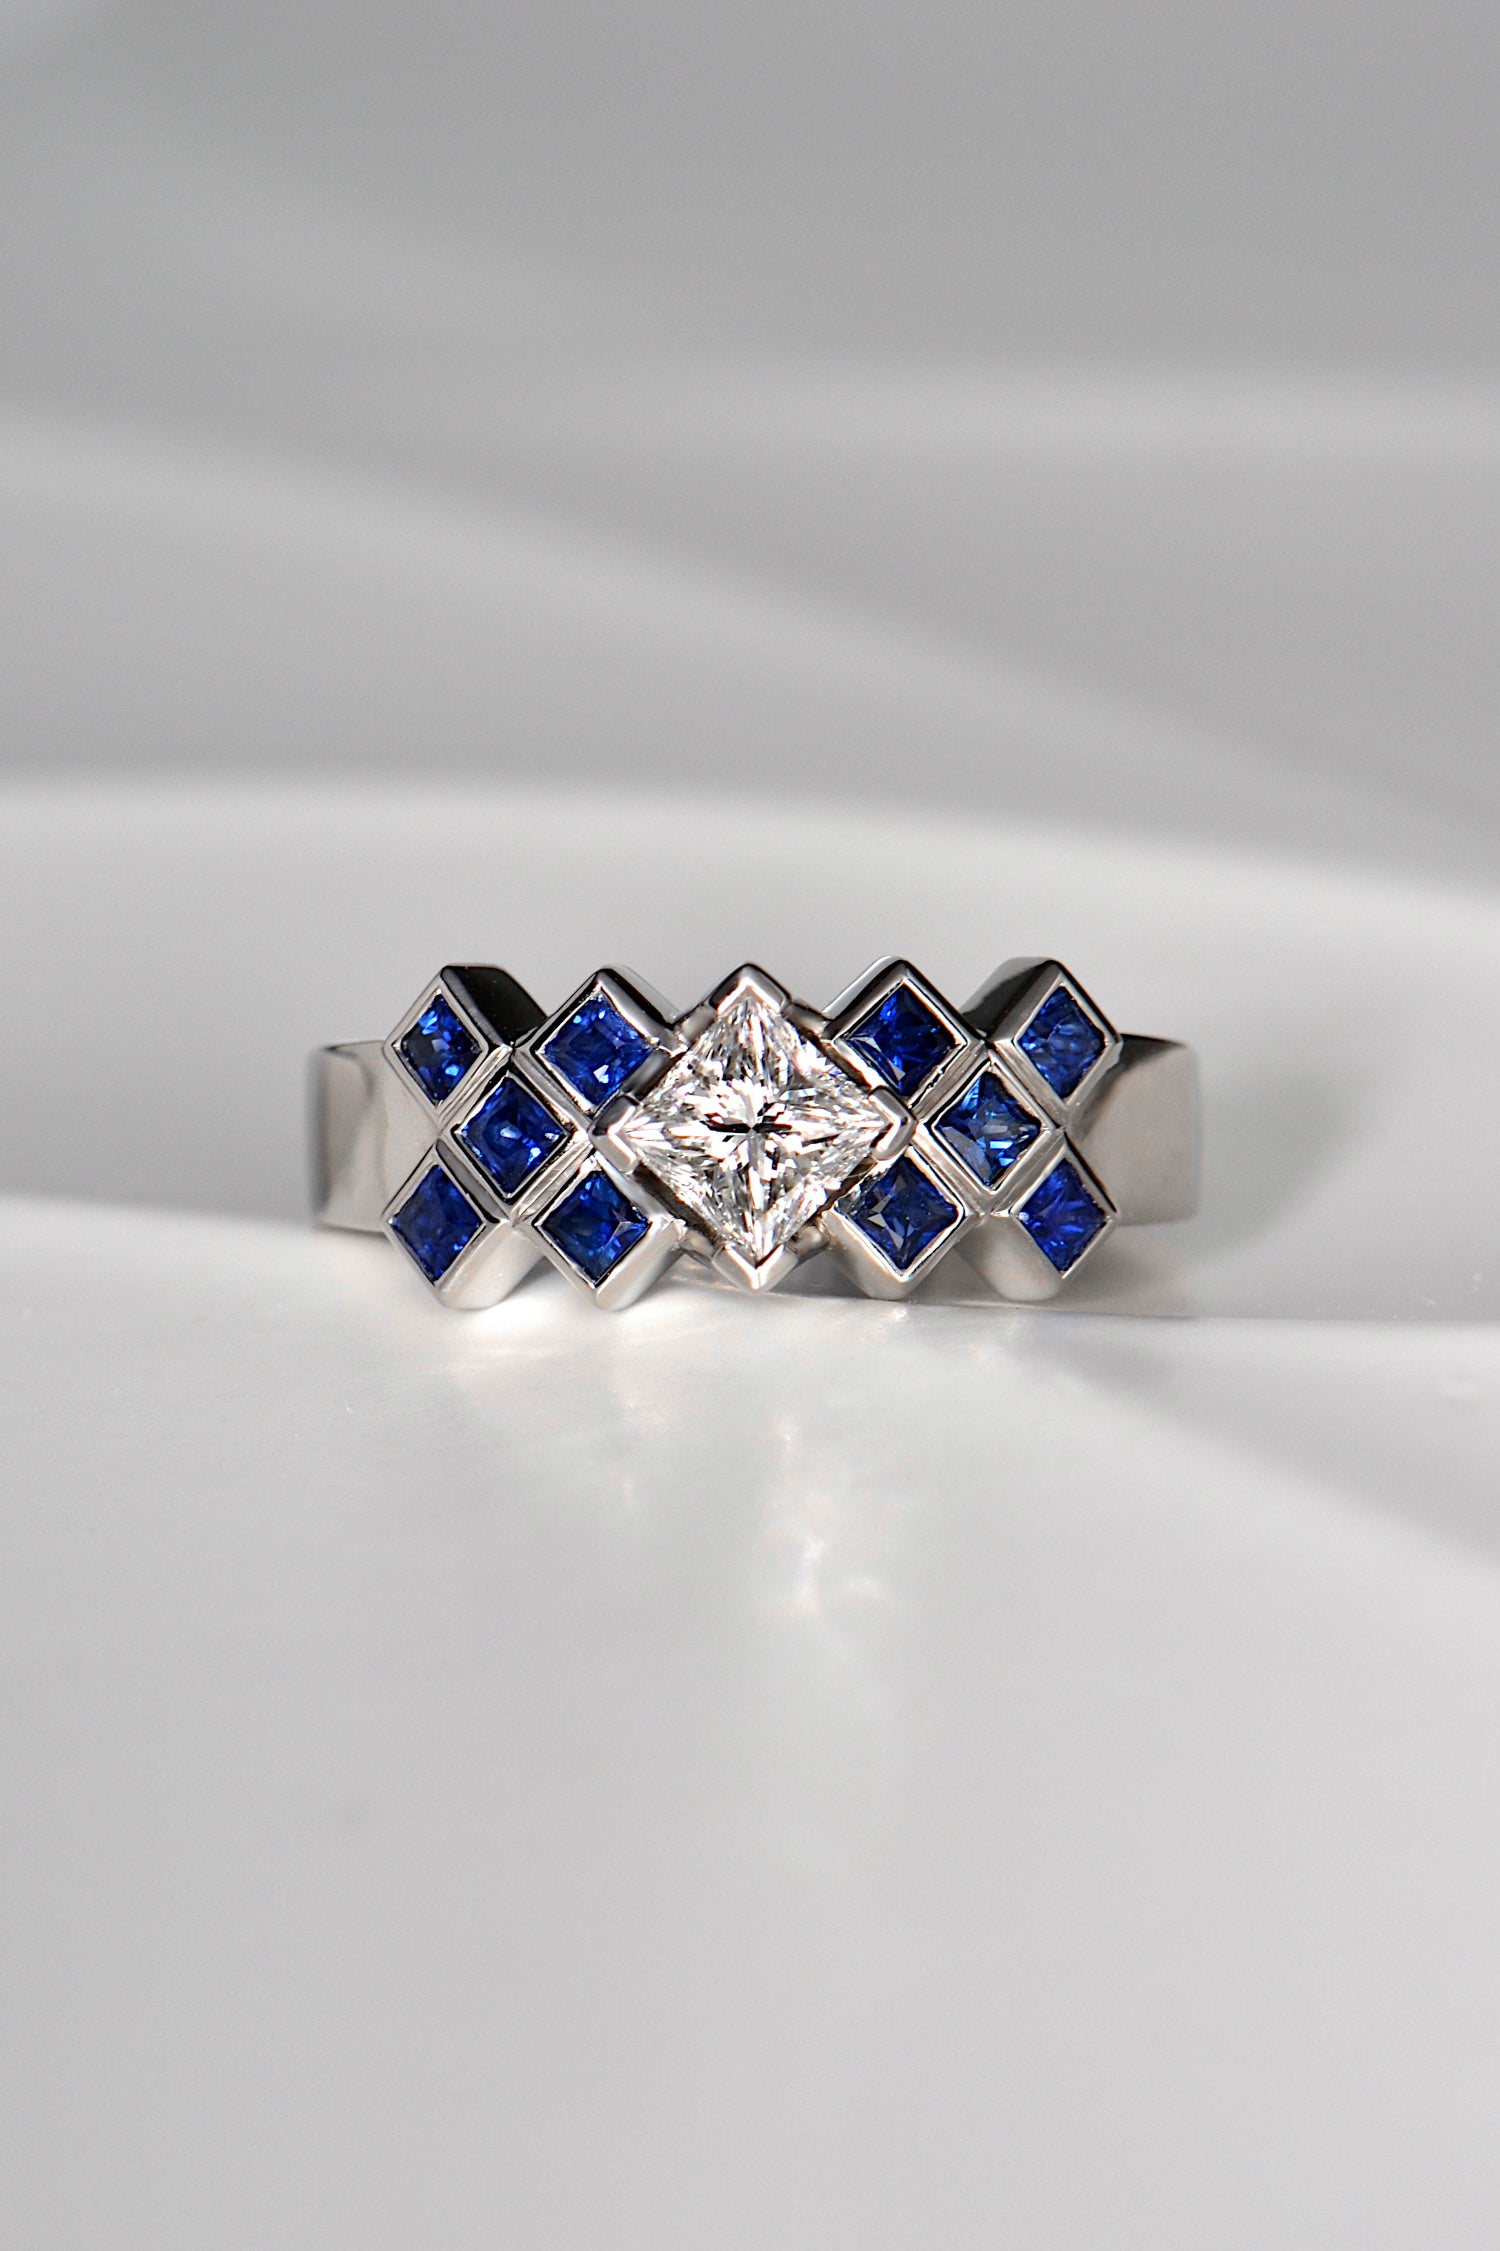 Princess cut diamond ring set with square blue sapphires in a tartan pattern. The ring is made of platinum and is a unique copyrighted design. 